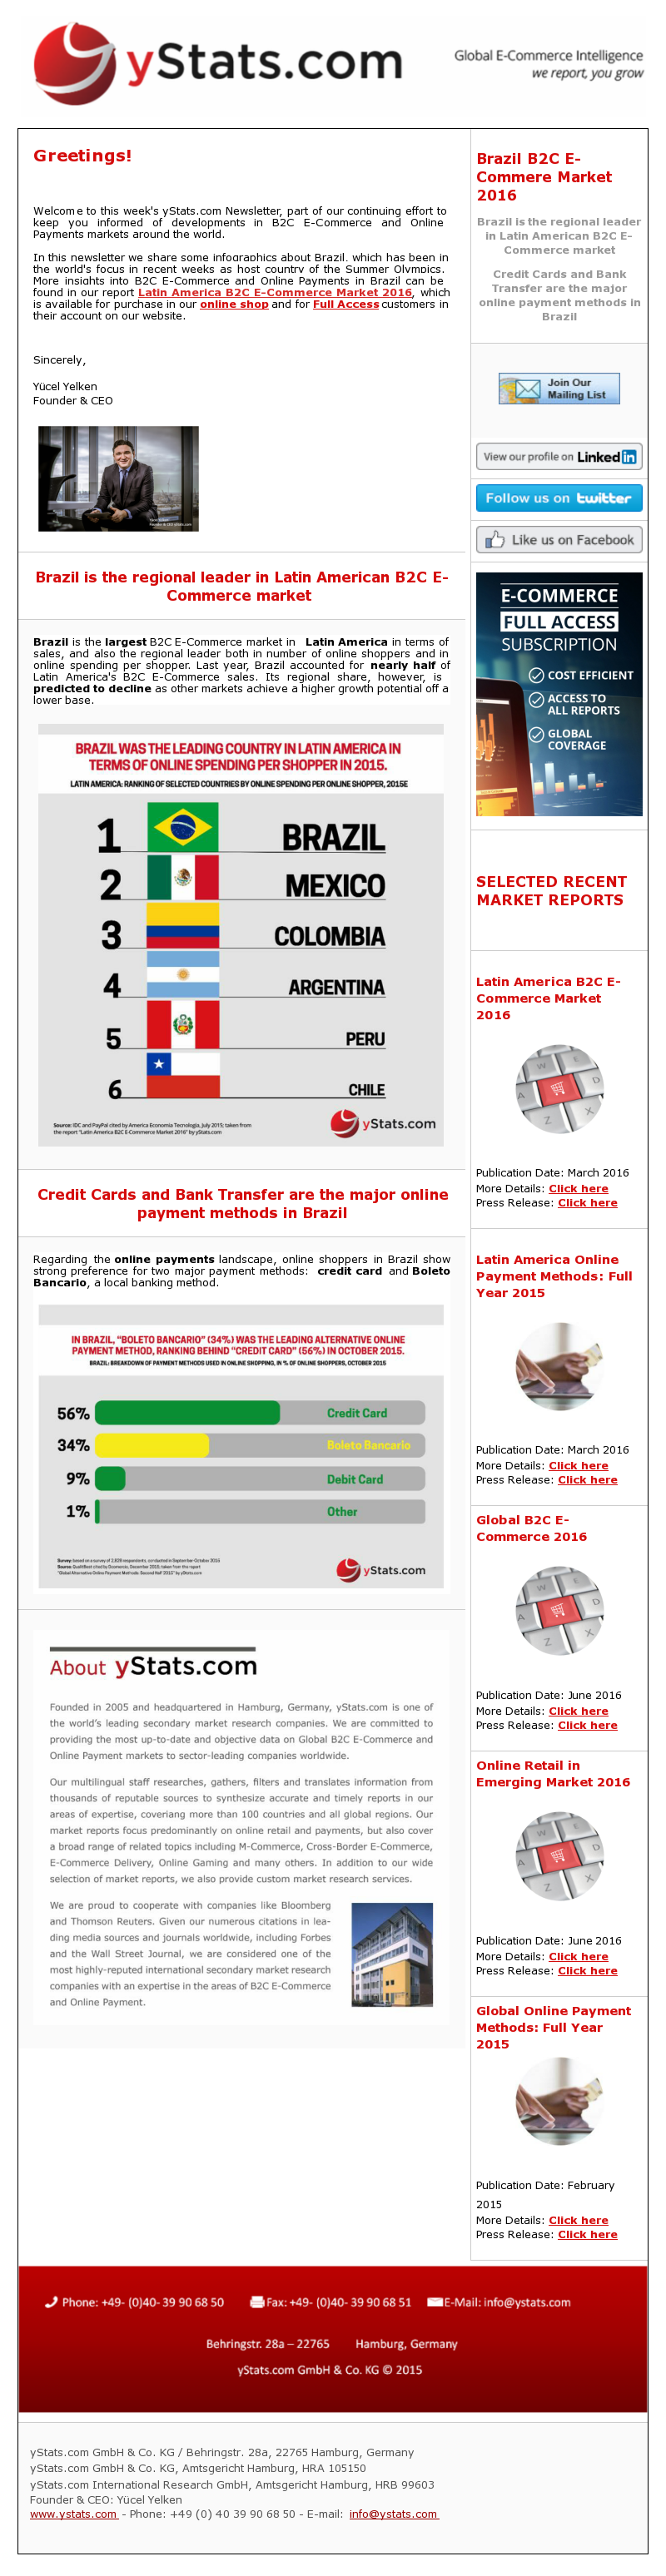 Smaller markets in Latin America outperform Brazil in B2C E-Commerce growth

Latin America’s B2C E-Commerce market is one of the smallest worldwide in terms of sales, the new report by yStats.com reveals. Online retail is only starting to evolve across this region and accounted for a tiny share of overall retail sales in 2015. This signals a great potential for further development. In the near future, B2C E-Commerce sales in Latin America are predicted to maintain strong double-digit growth rates, spurred by Internet access, financial services and online shopper penetration rising across the region. Both local and international E-Commerce companies are competing for a larger share of this growing market, with Amazon launching full operations in Mexico in 2015 and Argentina-based marketplace operator MercadoLibre scoring high by number of website visitors in almost every major market of the region.

Brazil is Latin America’s leader in B2C E-Commerce sales, with multiple sources cited in yStats.com’s report ranking it high above other countries in terms of sales, number of online shoppers and online spending per shopper. However, even in Brazil online retail accounted for less than 5% of total retail sales in 2015 and is not expected to break this threshold in the next few years.

Argentina and Mexico are predicted to overtake Brazil in B2C E-Commerce sales growth. In 2015, Argentina was already the region’s strongest performer in terms of growth rate, with online retail rising by a high double-digit percentage share. Meanwhile, Mexico was ahead of other countries in Latin America in the adoption of major market trends including M-Commerce and cross-border online shopping, according to the findings revealed in yStats.com’s report.

Furthermore, Chile had the highest Internet and online shopper penetration in higher-income population groups in Latin America last year, though showing a significant discrepancy between rural and urban regions in online retail development. In Colombia, on the contrary, online shopper penetration among Internet users was very low, in the single-digit range, but improving. Another market to watch is Peru. Though currently accounting for less than 1% of the country’s total retail sales, B2C E-Commerce in Peru is likely to be spurred by the rising Internet penetration and a program for financial inclusion launched by the government in 2015.